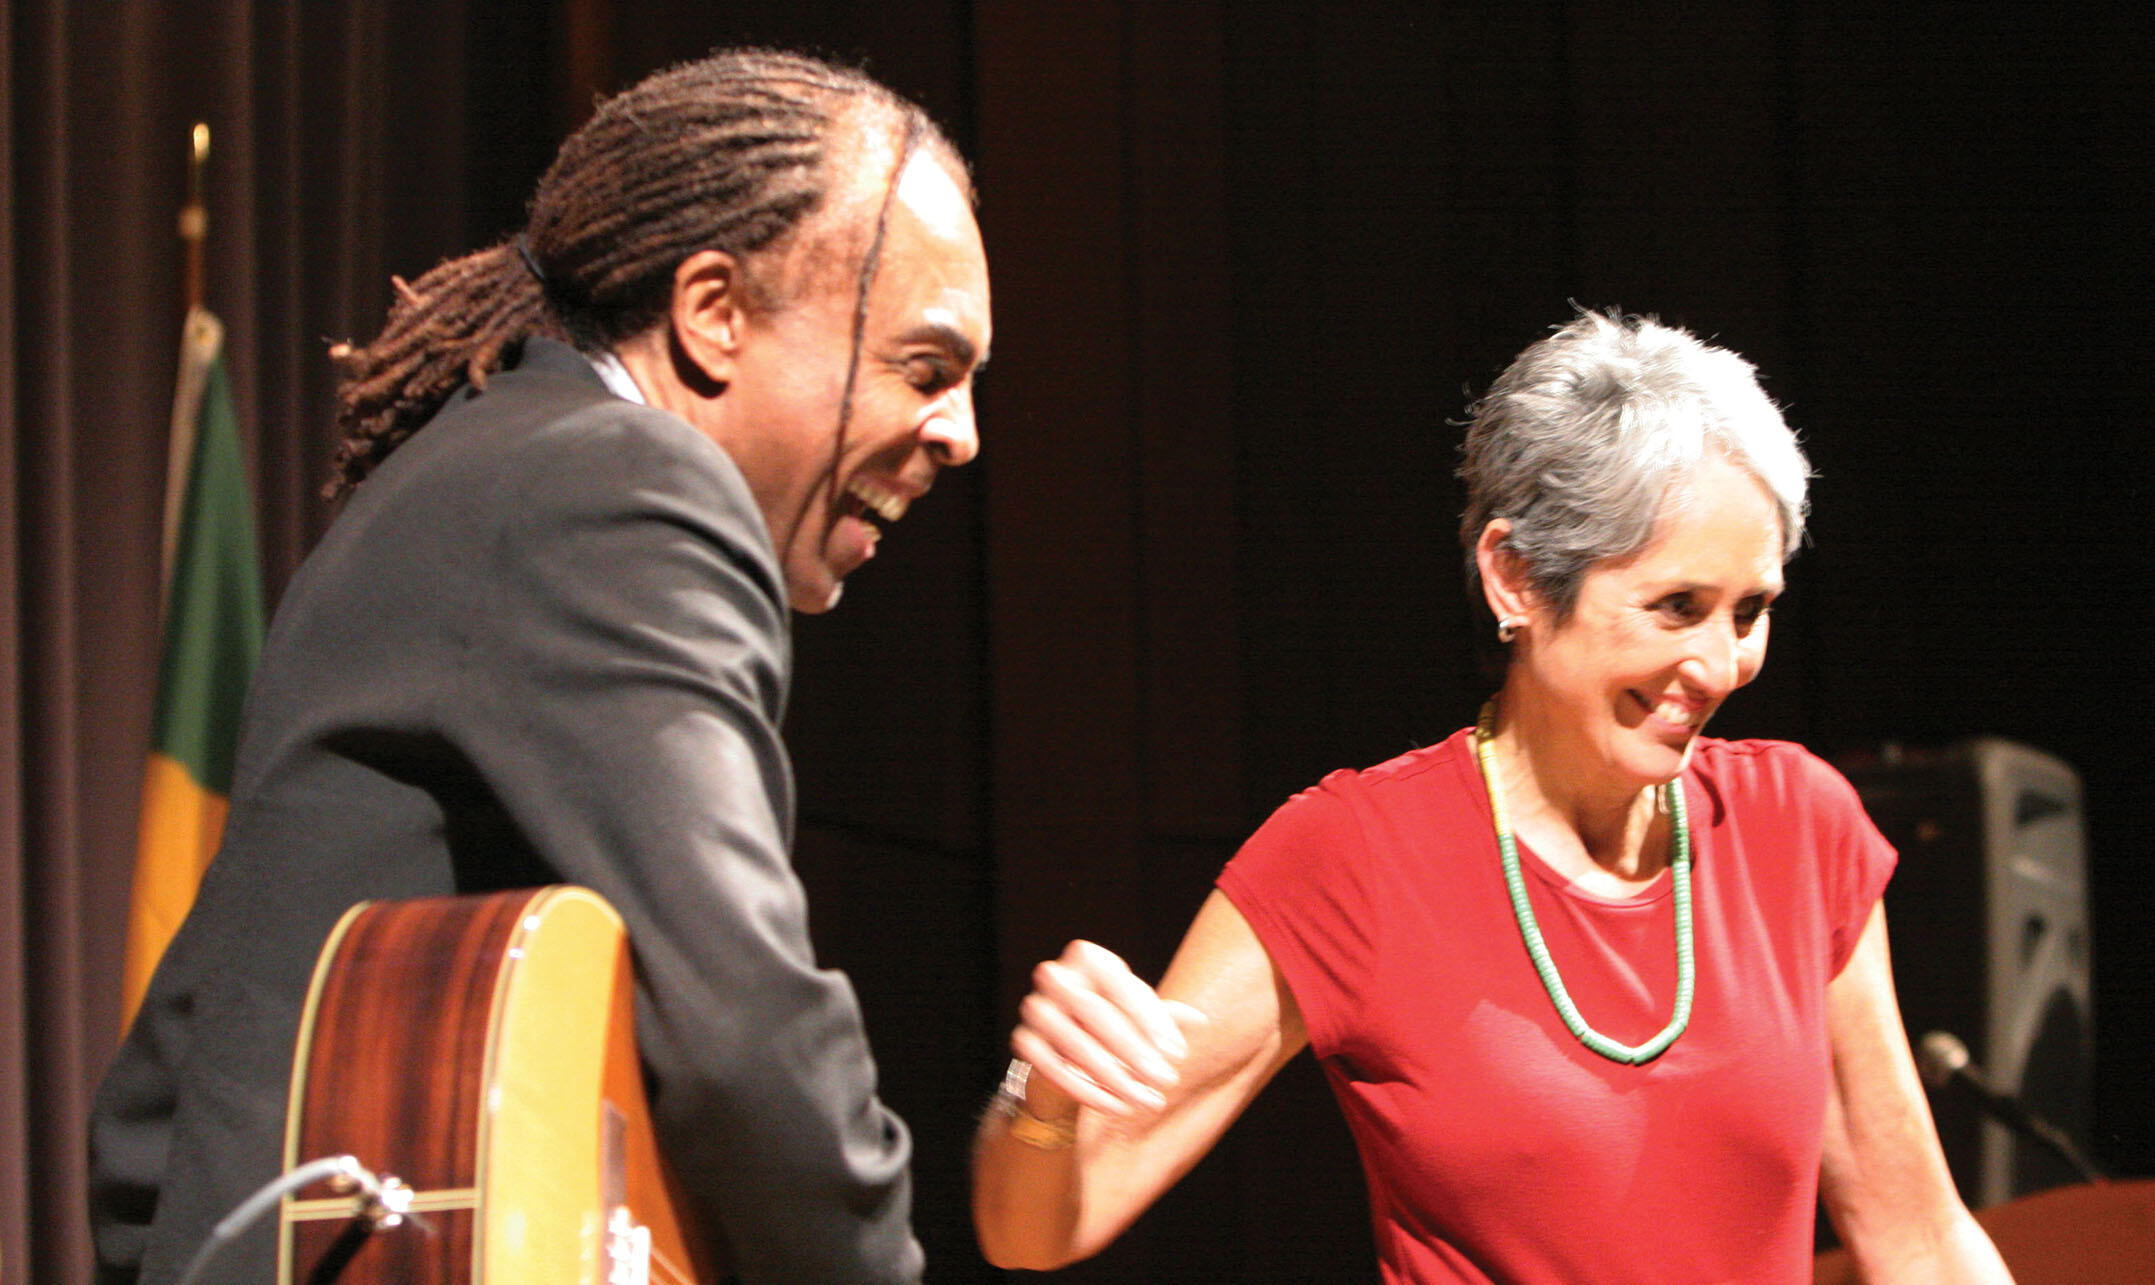 Gilberto Gil and Joan Baez while she dances during his performance at UC Berkeley, February 2005. (Photo by Scott Squire.)